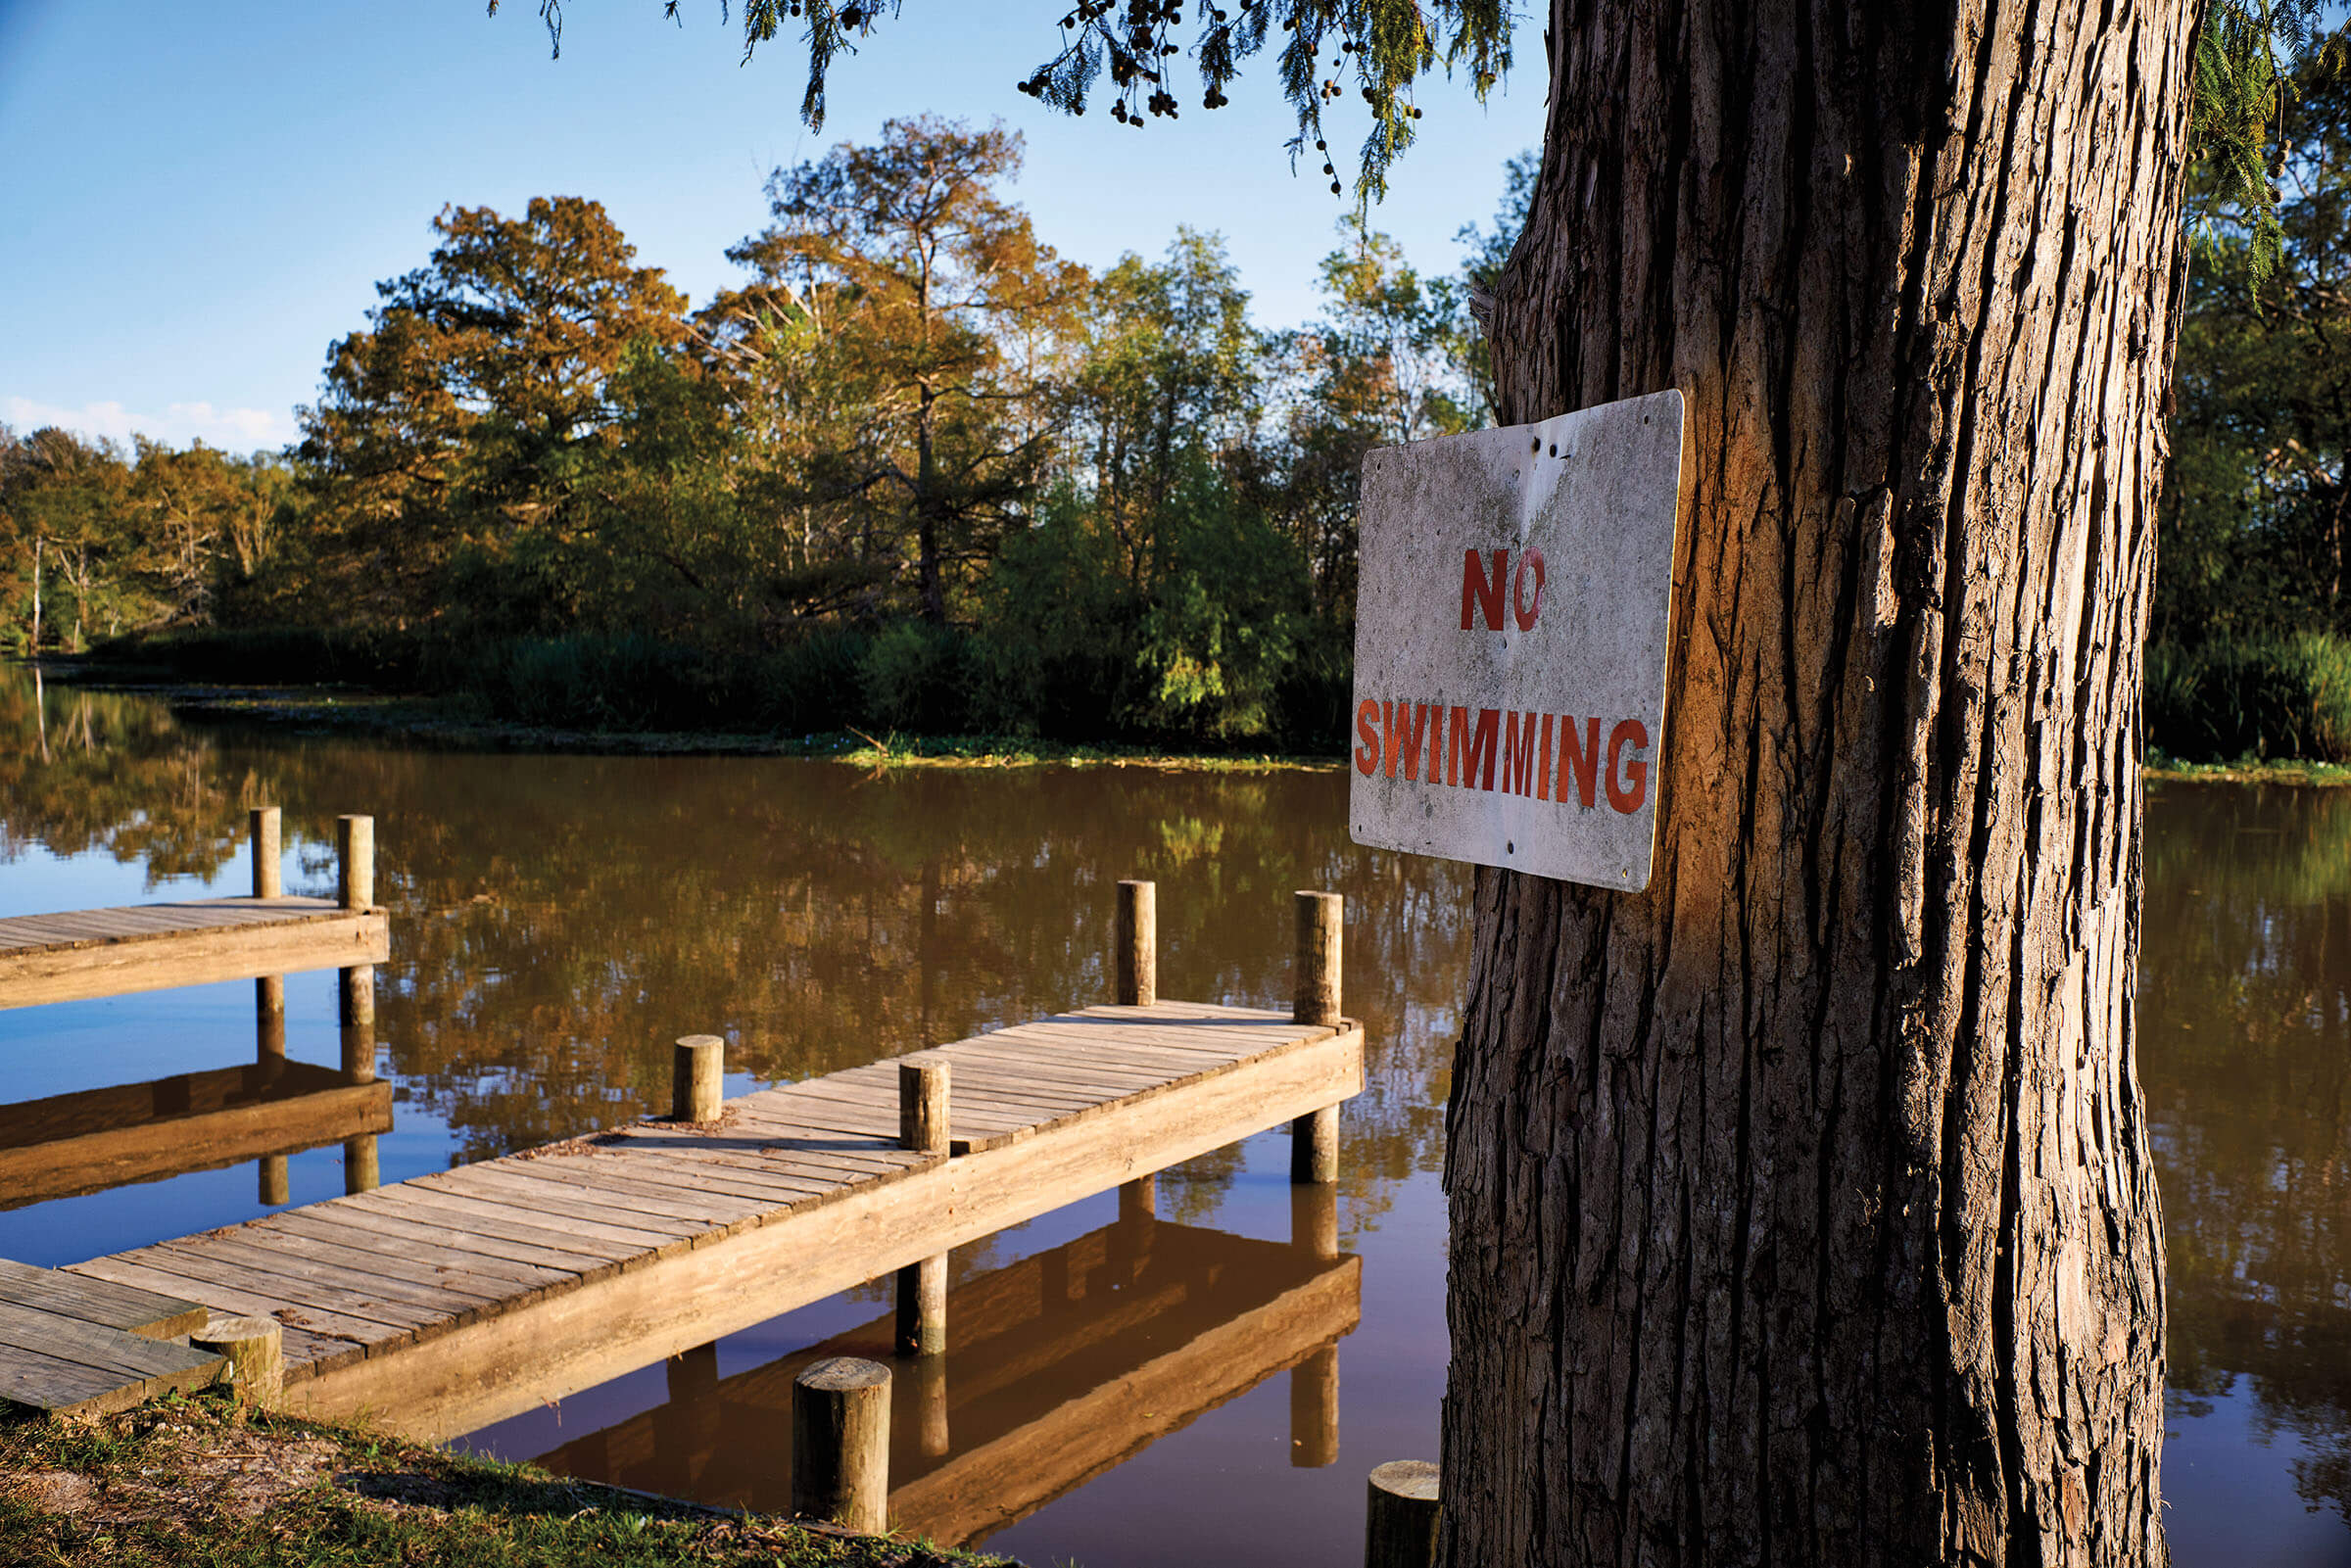 A sign reads "No Swimming" next to a dock along brown water and tall trees